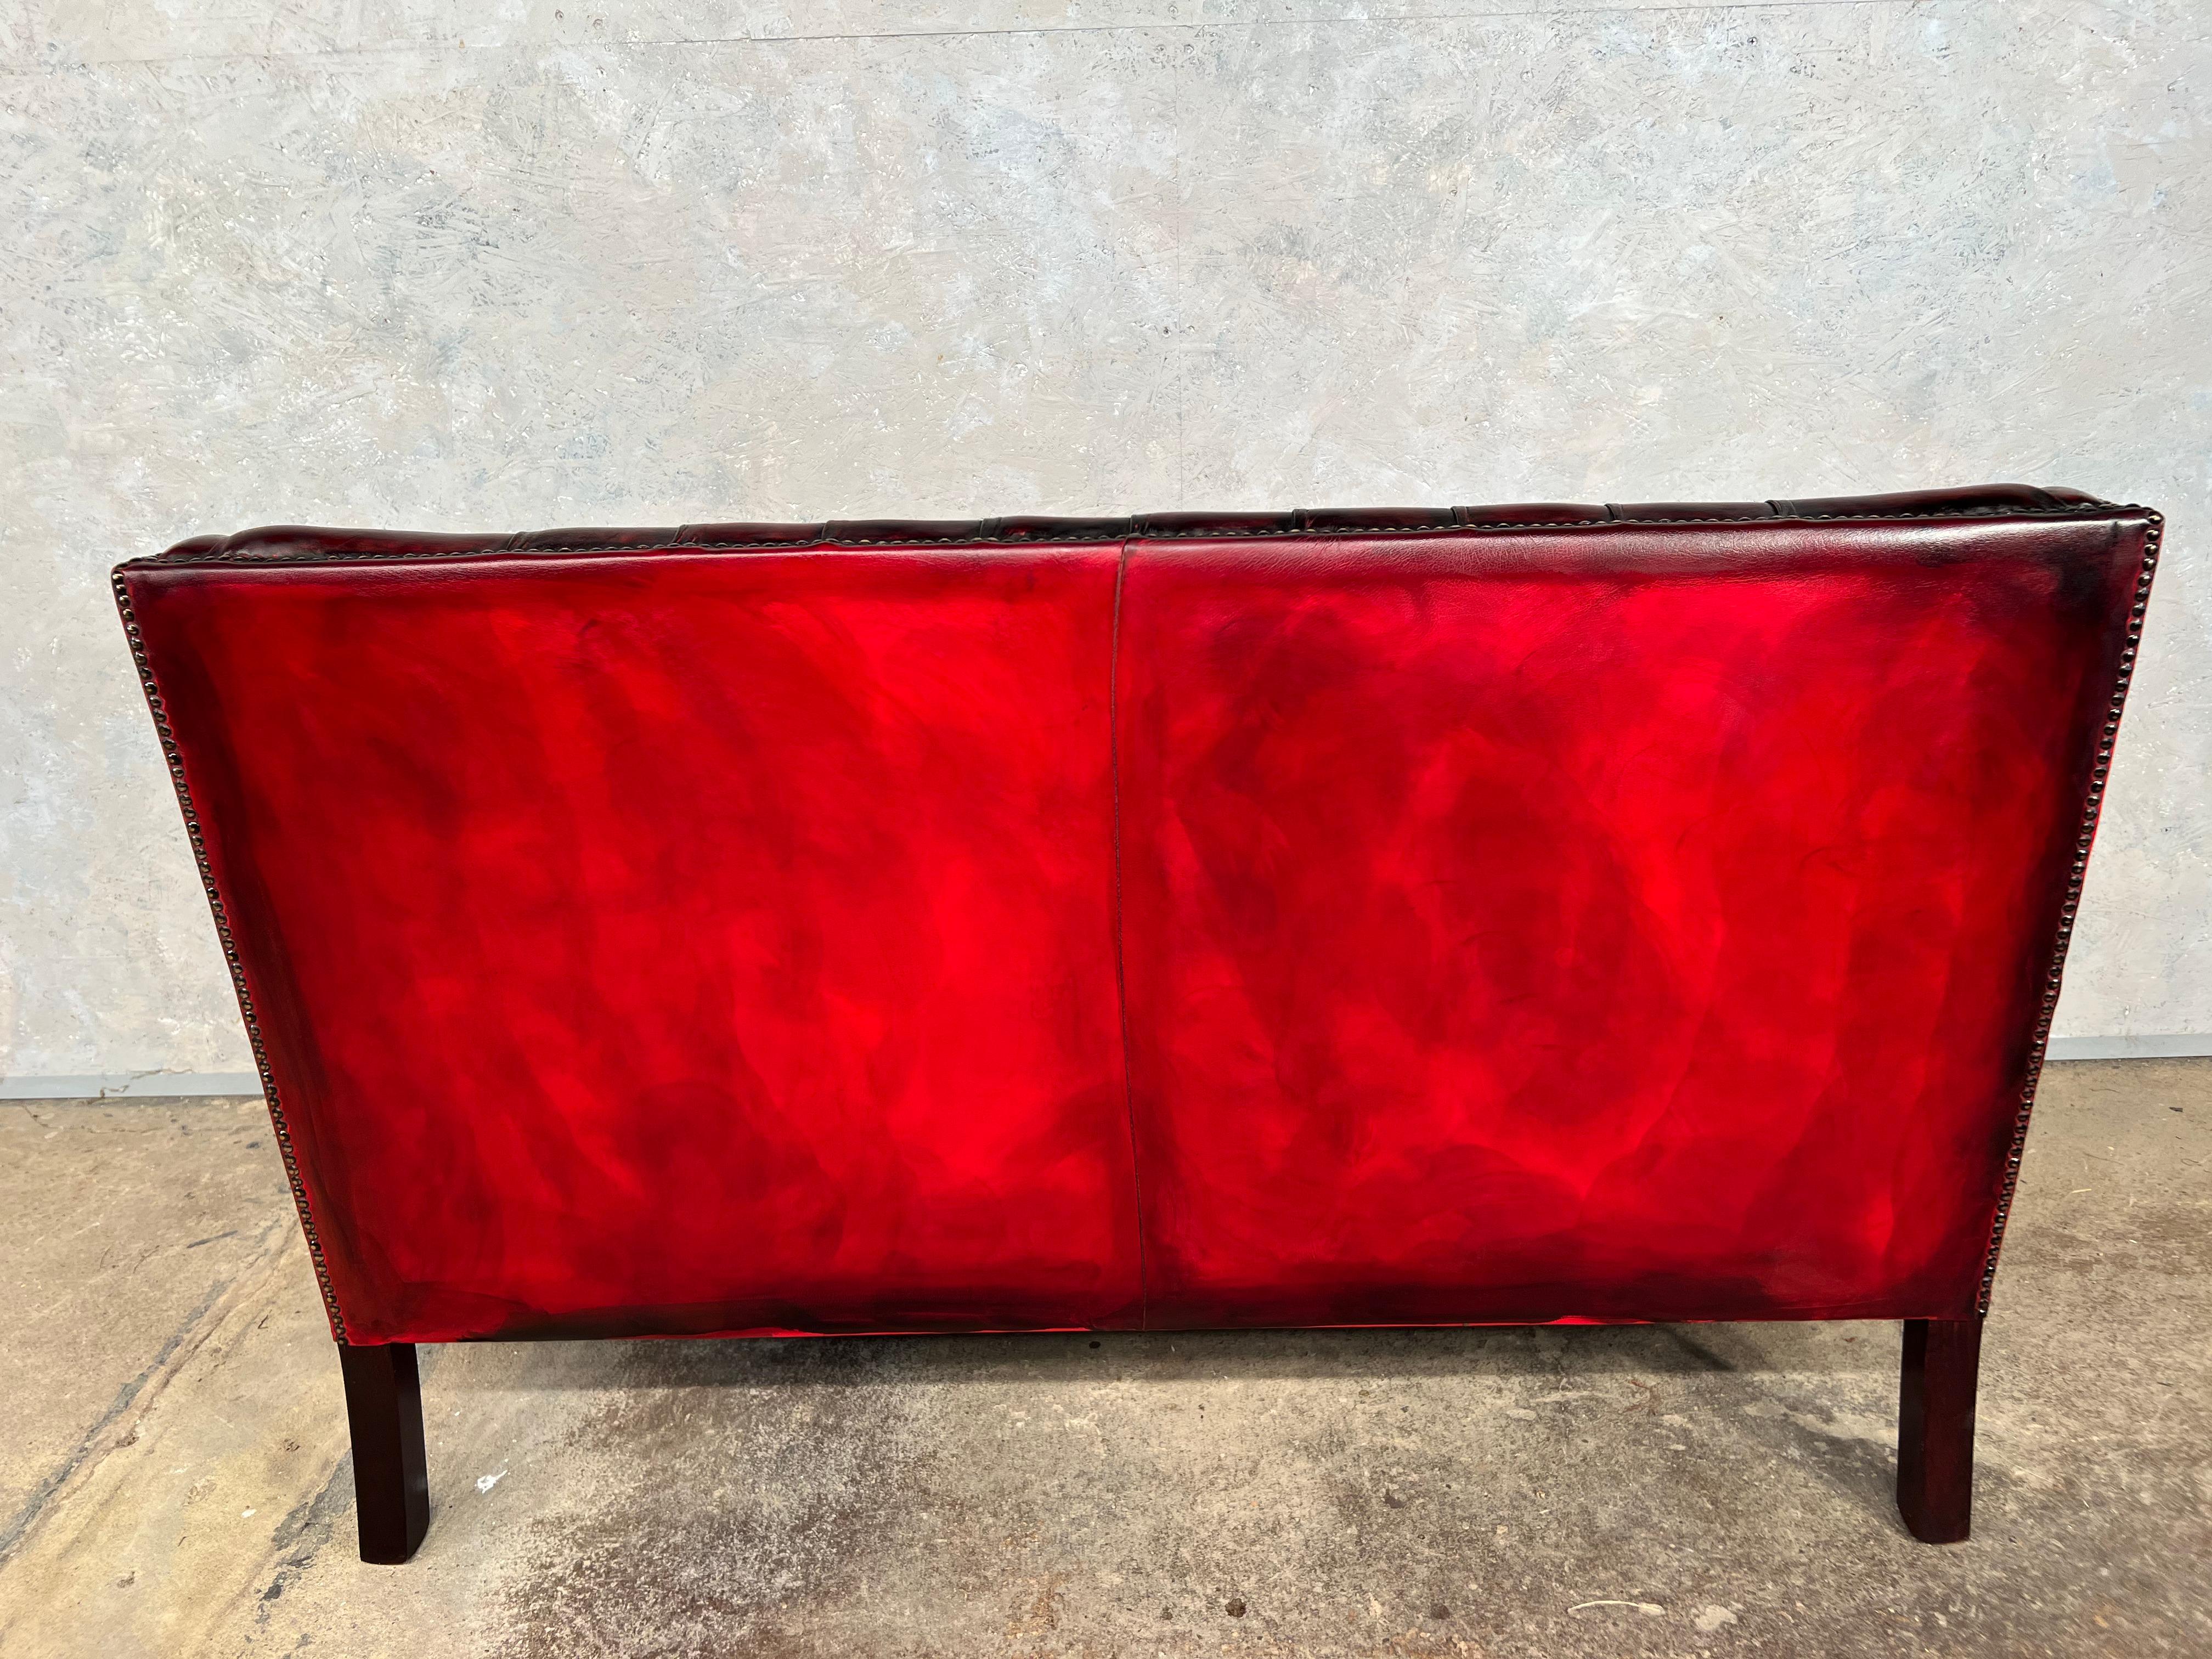 Leather A Neat Mid C English Made Two Seater Chesterfield Sofa Hand dyed Deep Red #495 For Sale